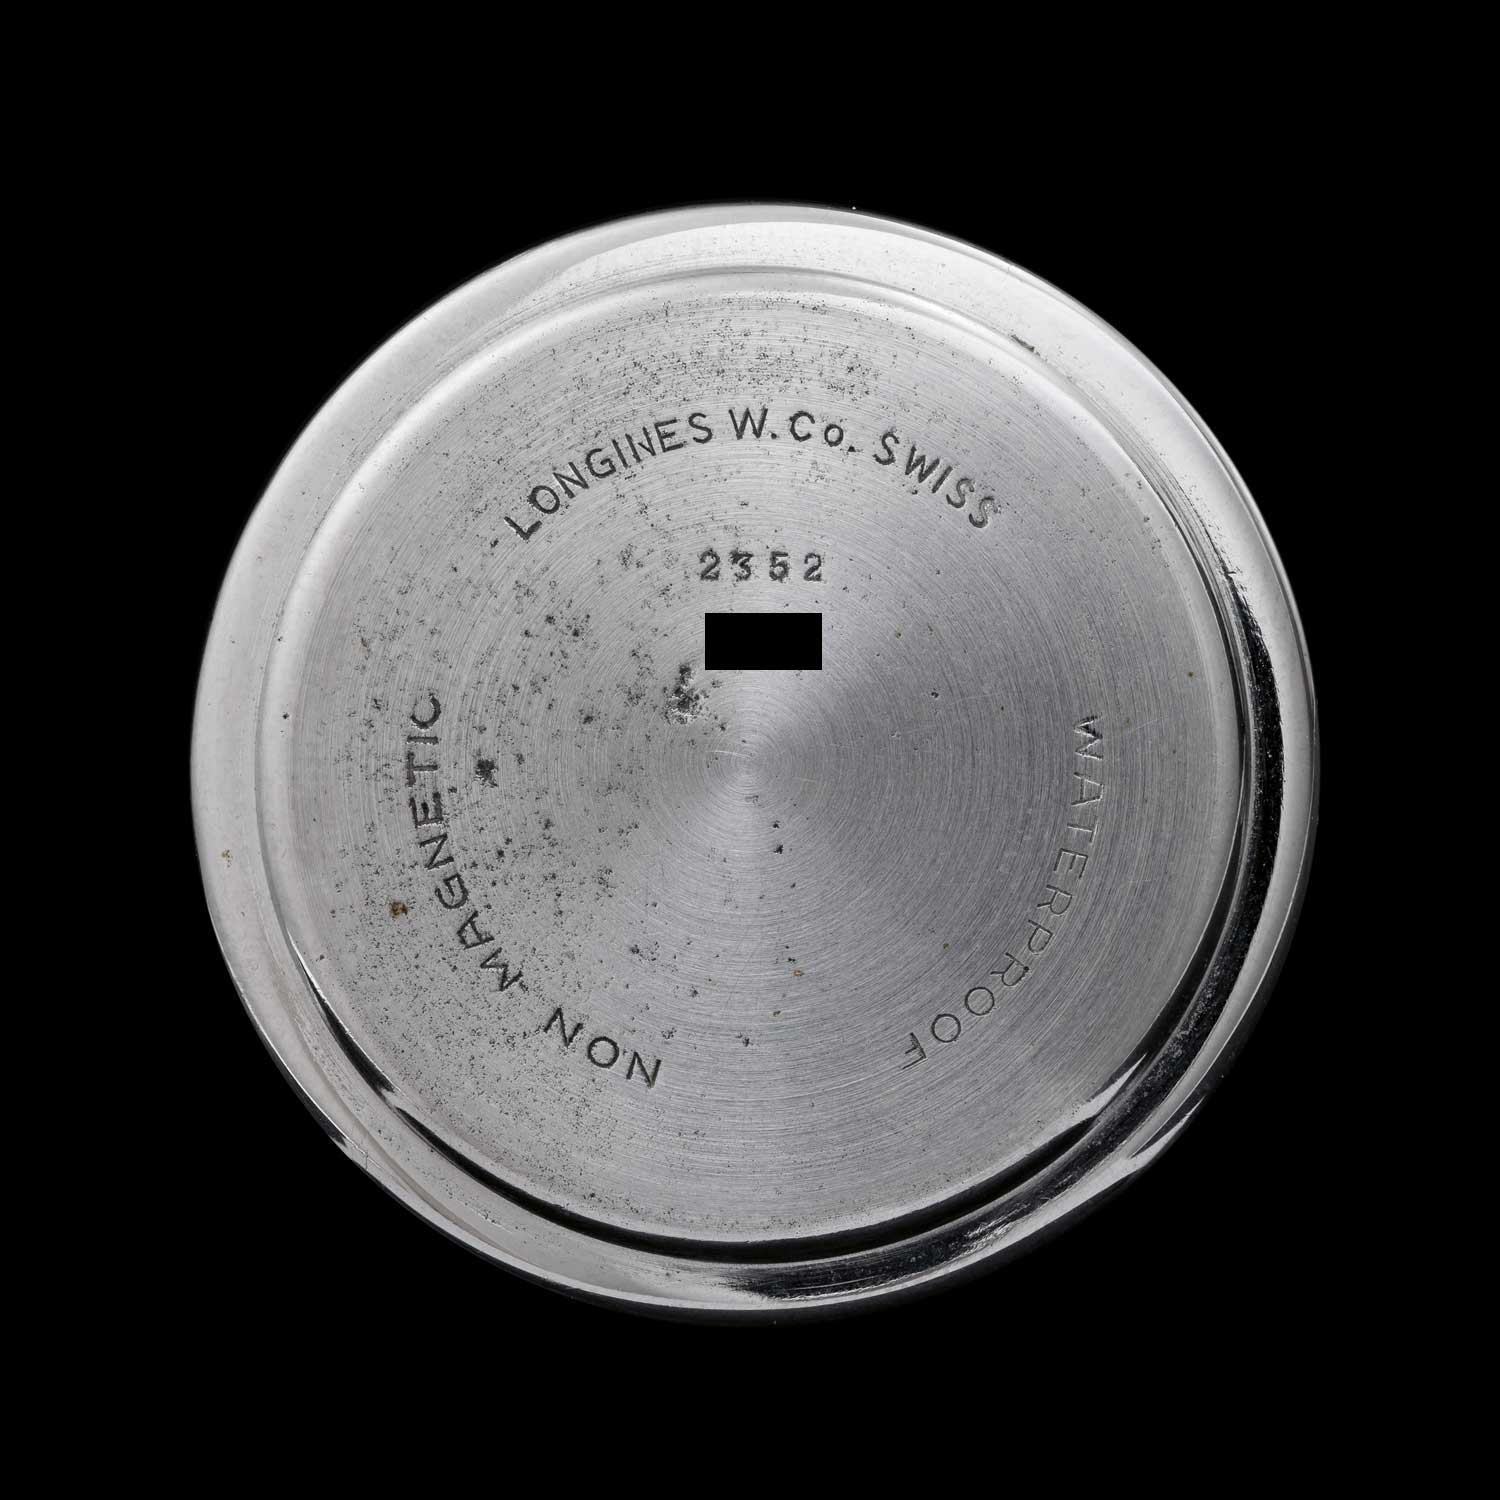 The ref. 4270 with a stainless steel snapback, stamped with the order no. 2352 and the words “waterproof”and“nonmagnetic”.